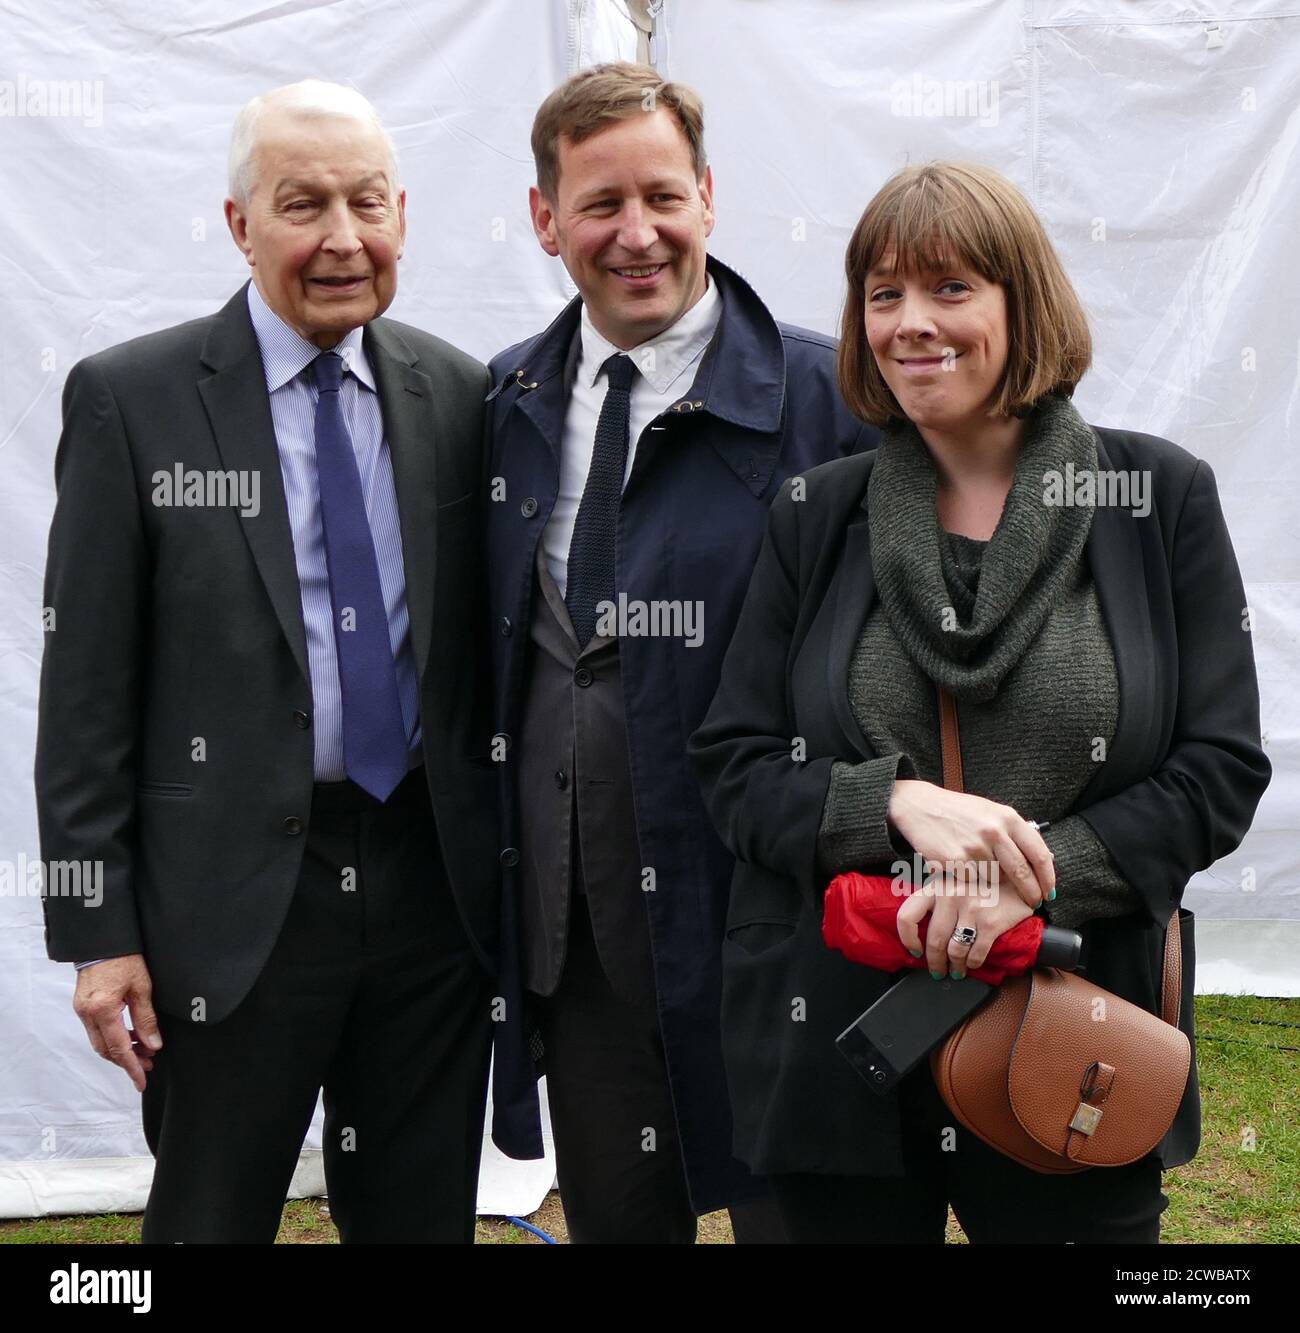 Frank Field, Chris Leslie and Jess Phillips arrive for media interviews after returning to parliament after the prorogation was annulled by the Supreme Court. 25th September 2019. . Jess Phillips (born 1981), British Labour Party politician, Member of Parliament since 2015. Frank Field (born 1942), British politician who has been the Member of Parliament (MP) for Birkenhead since 1979, serving as a Labour Party MP until August 2018 and thereafter as an Independent. Chris Leslie (born 1972) British politician and Member of Parliament (MP) for Nottingham East since 2010. minister in the Departme Stock Photo